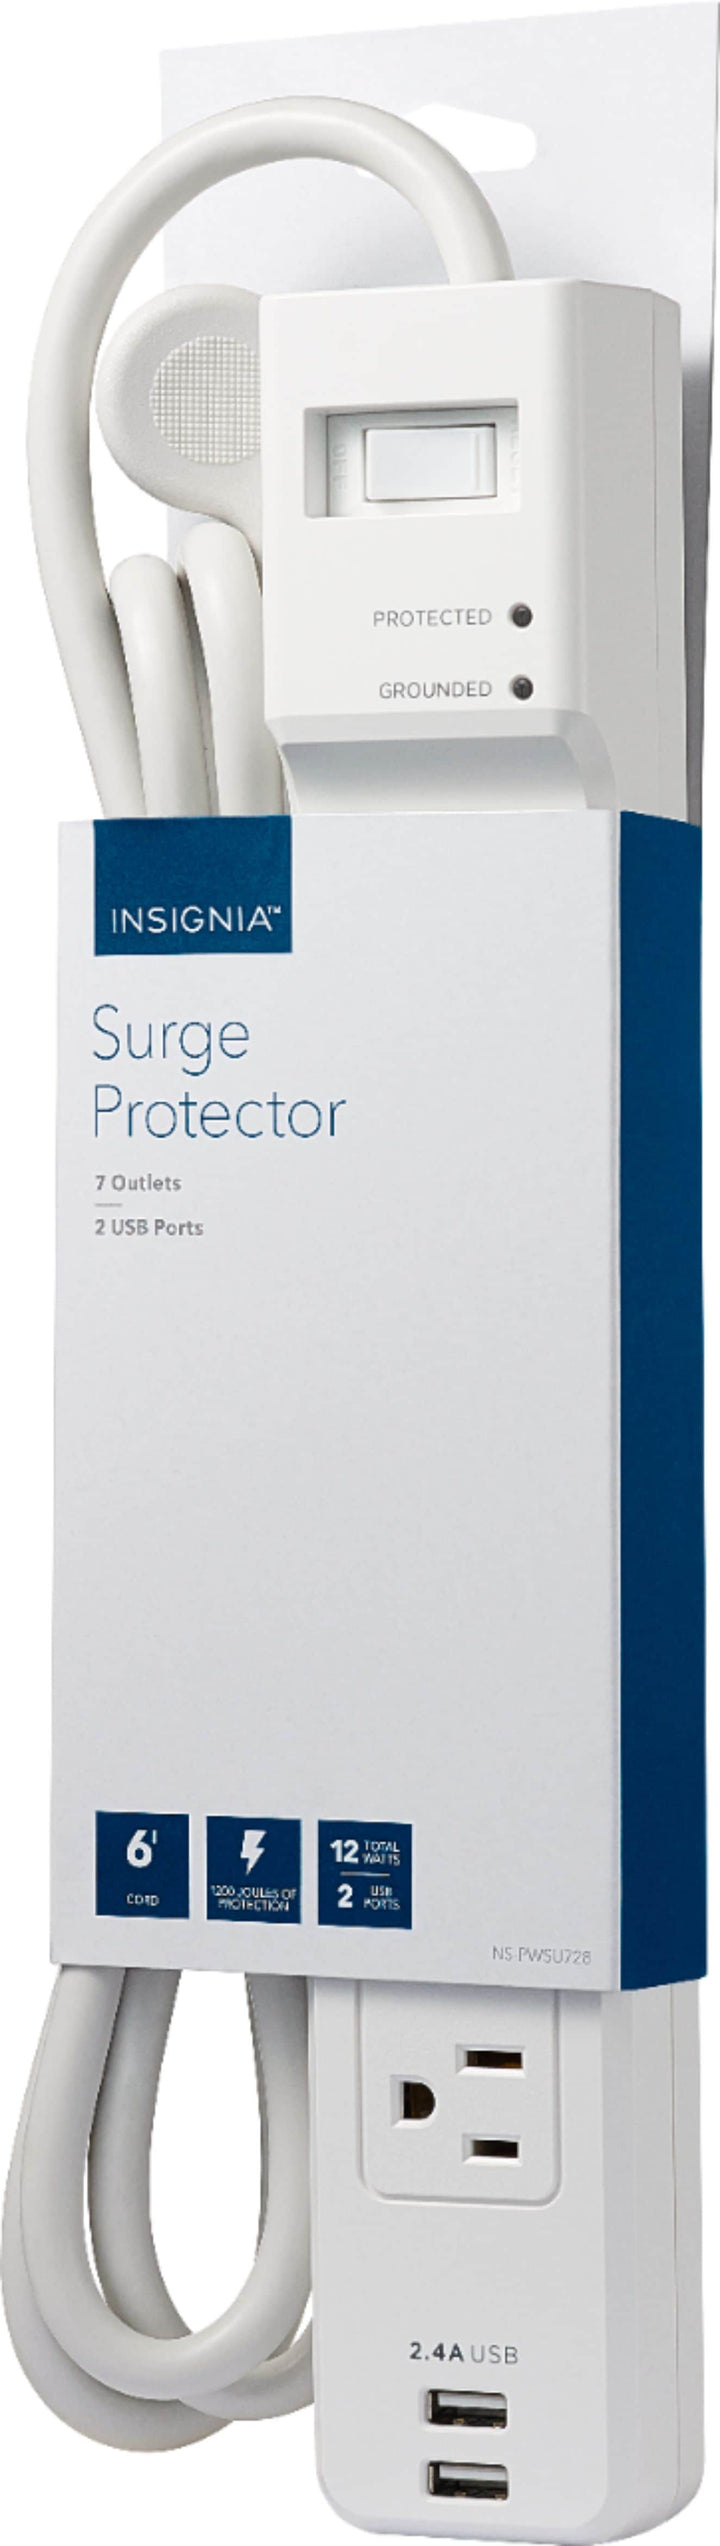 Insignia™ - 7-Outlet/2-USB Surge Protector - White_2